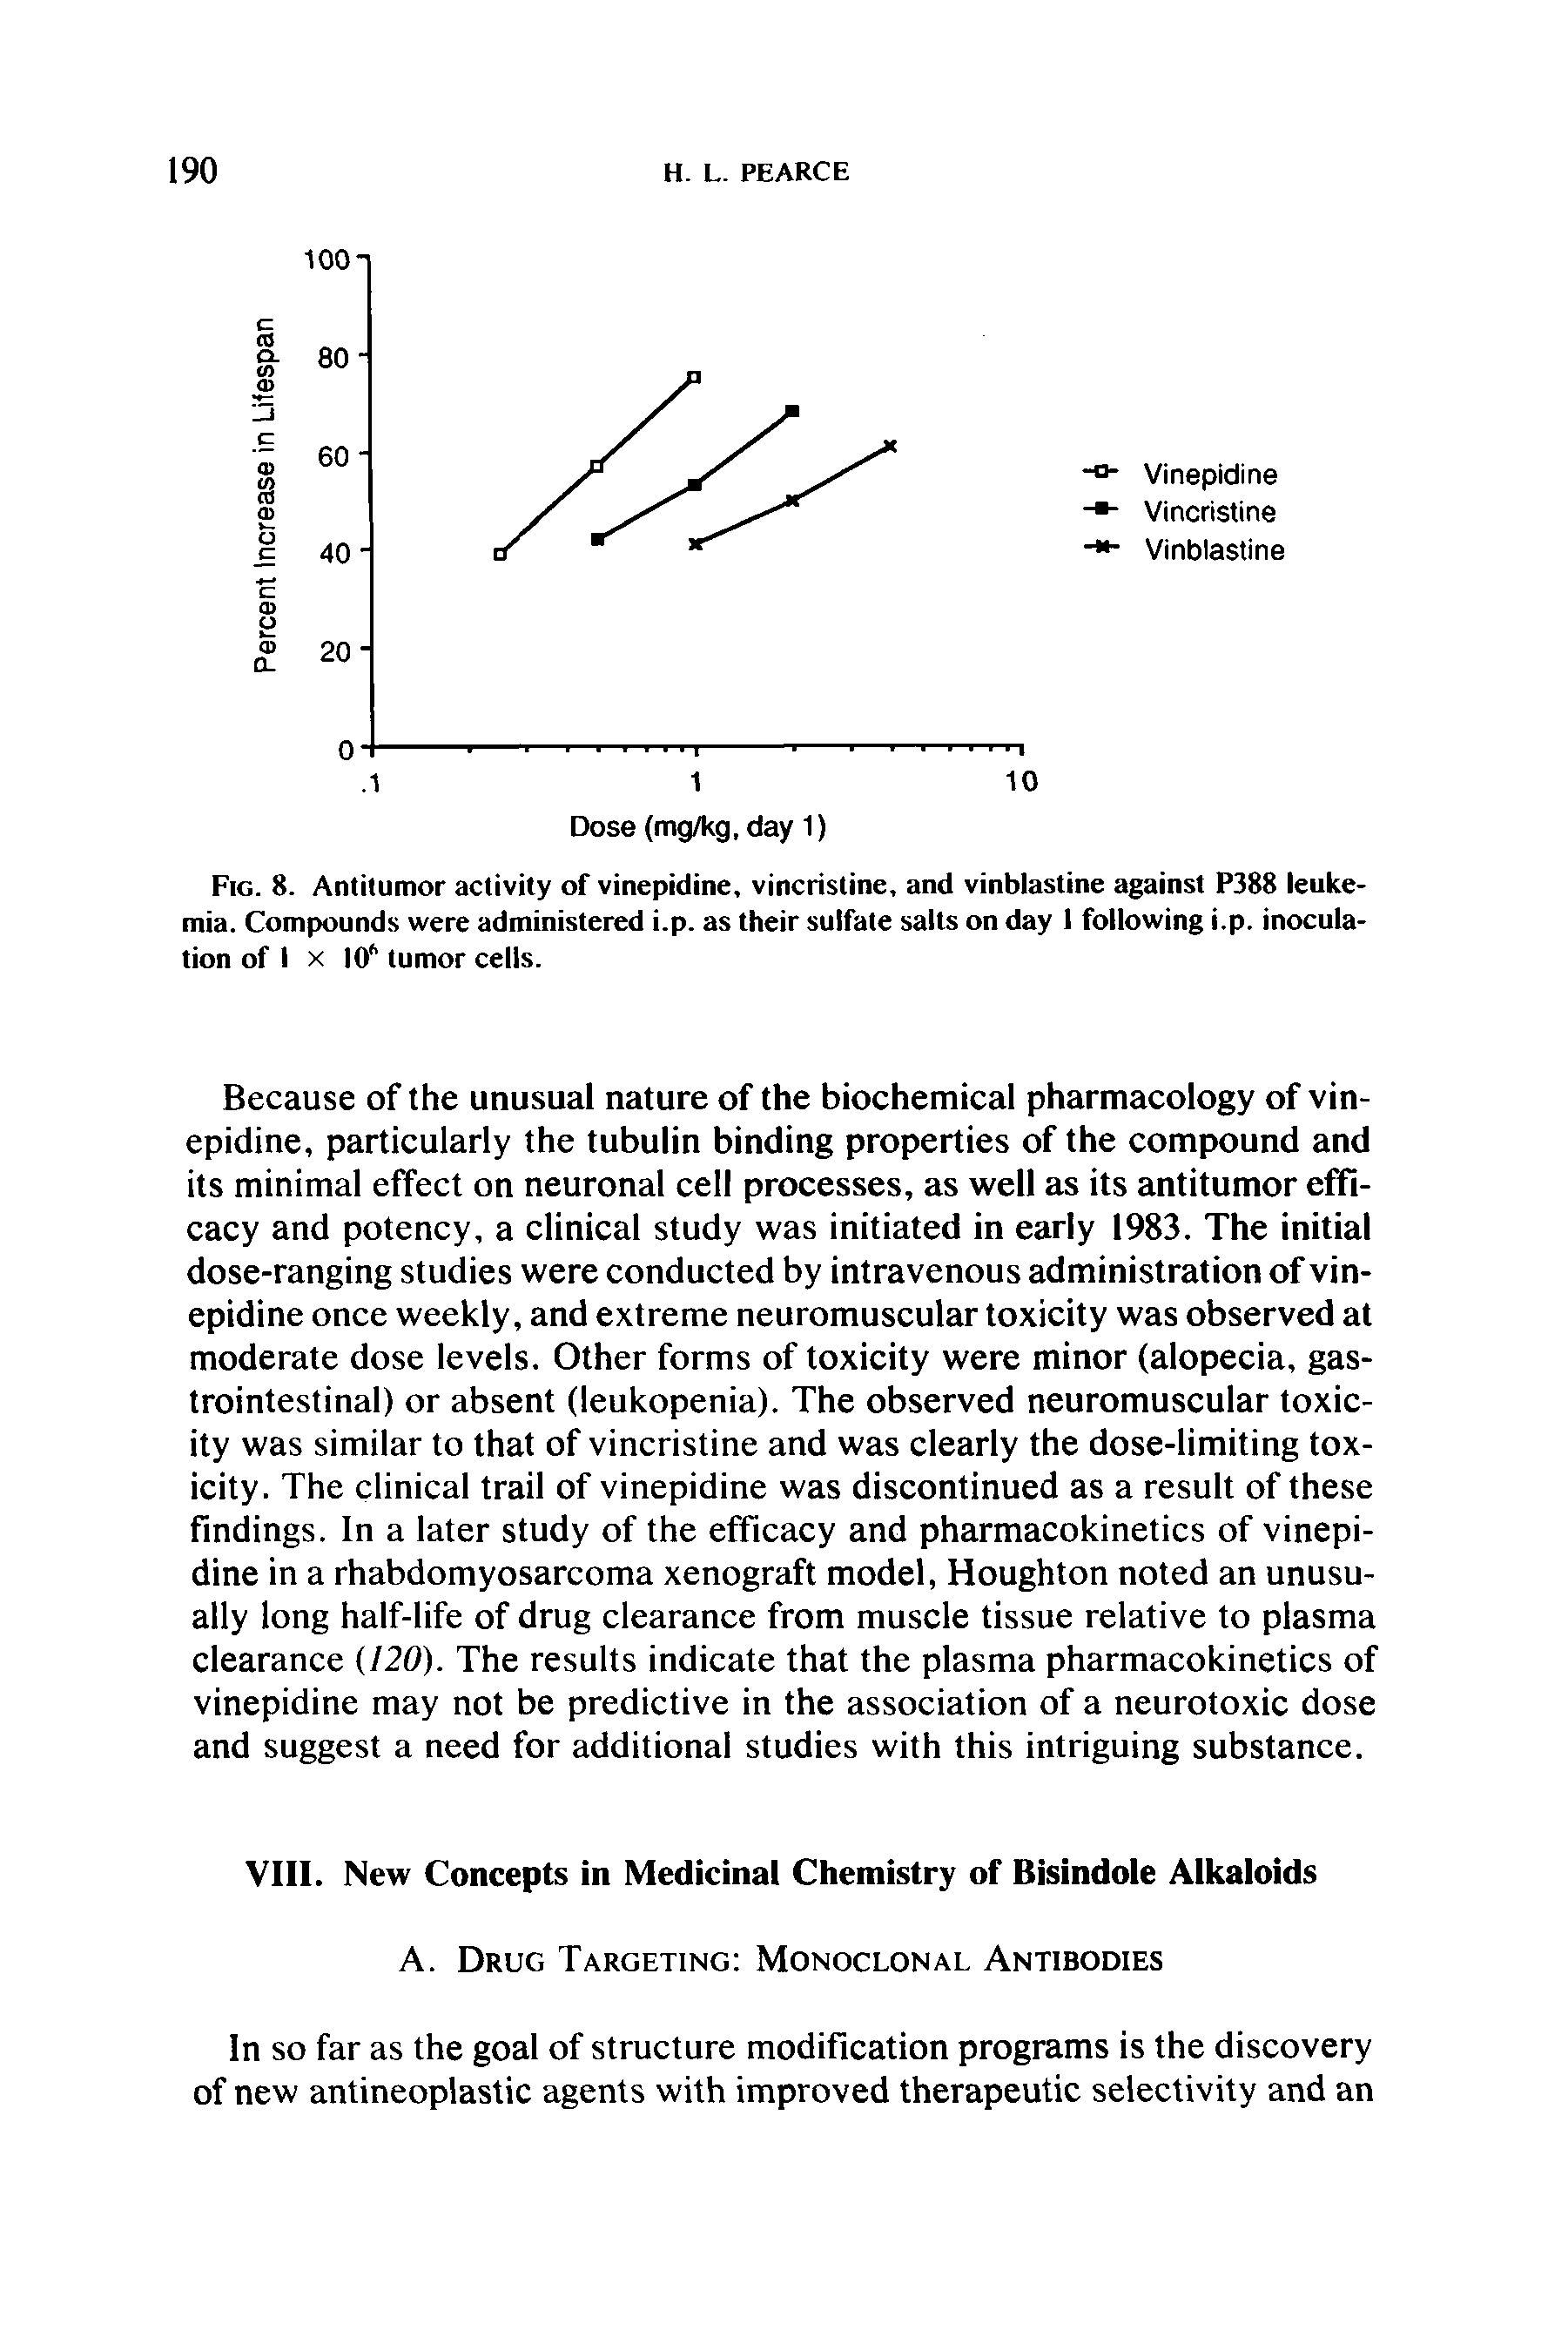 Fig. 8. Antitumor activity of vinepidine, vincristine, and vinblastine against P388 leukemia. Compounds were administered i.p. as their sulfate salts on day I following i.p. inoculation of I X 10 tumor cells.